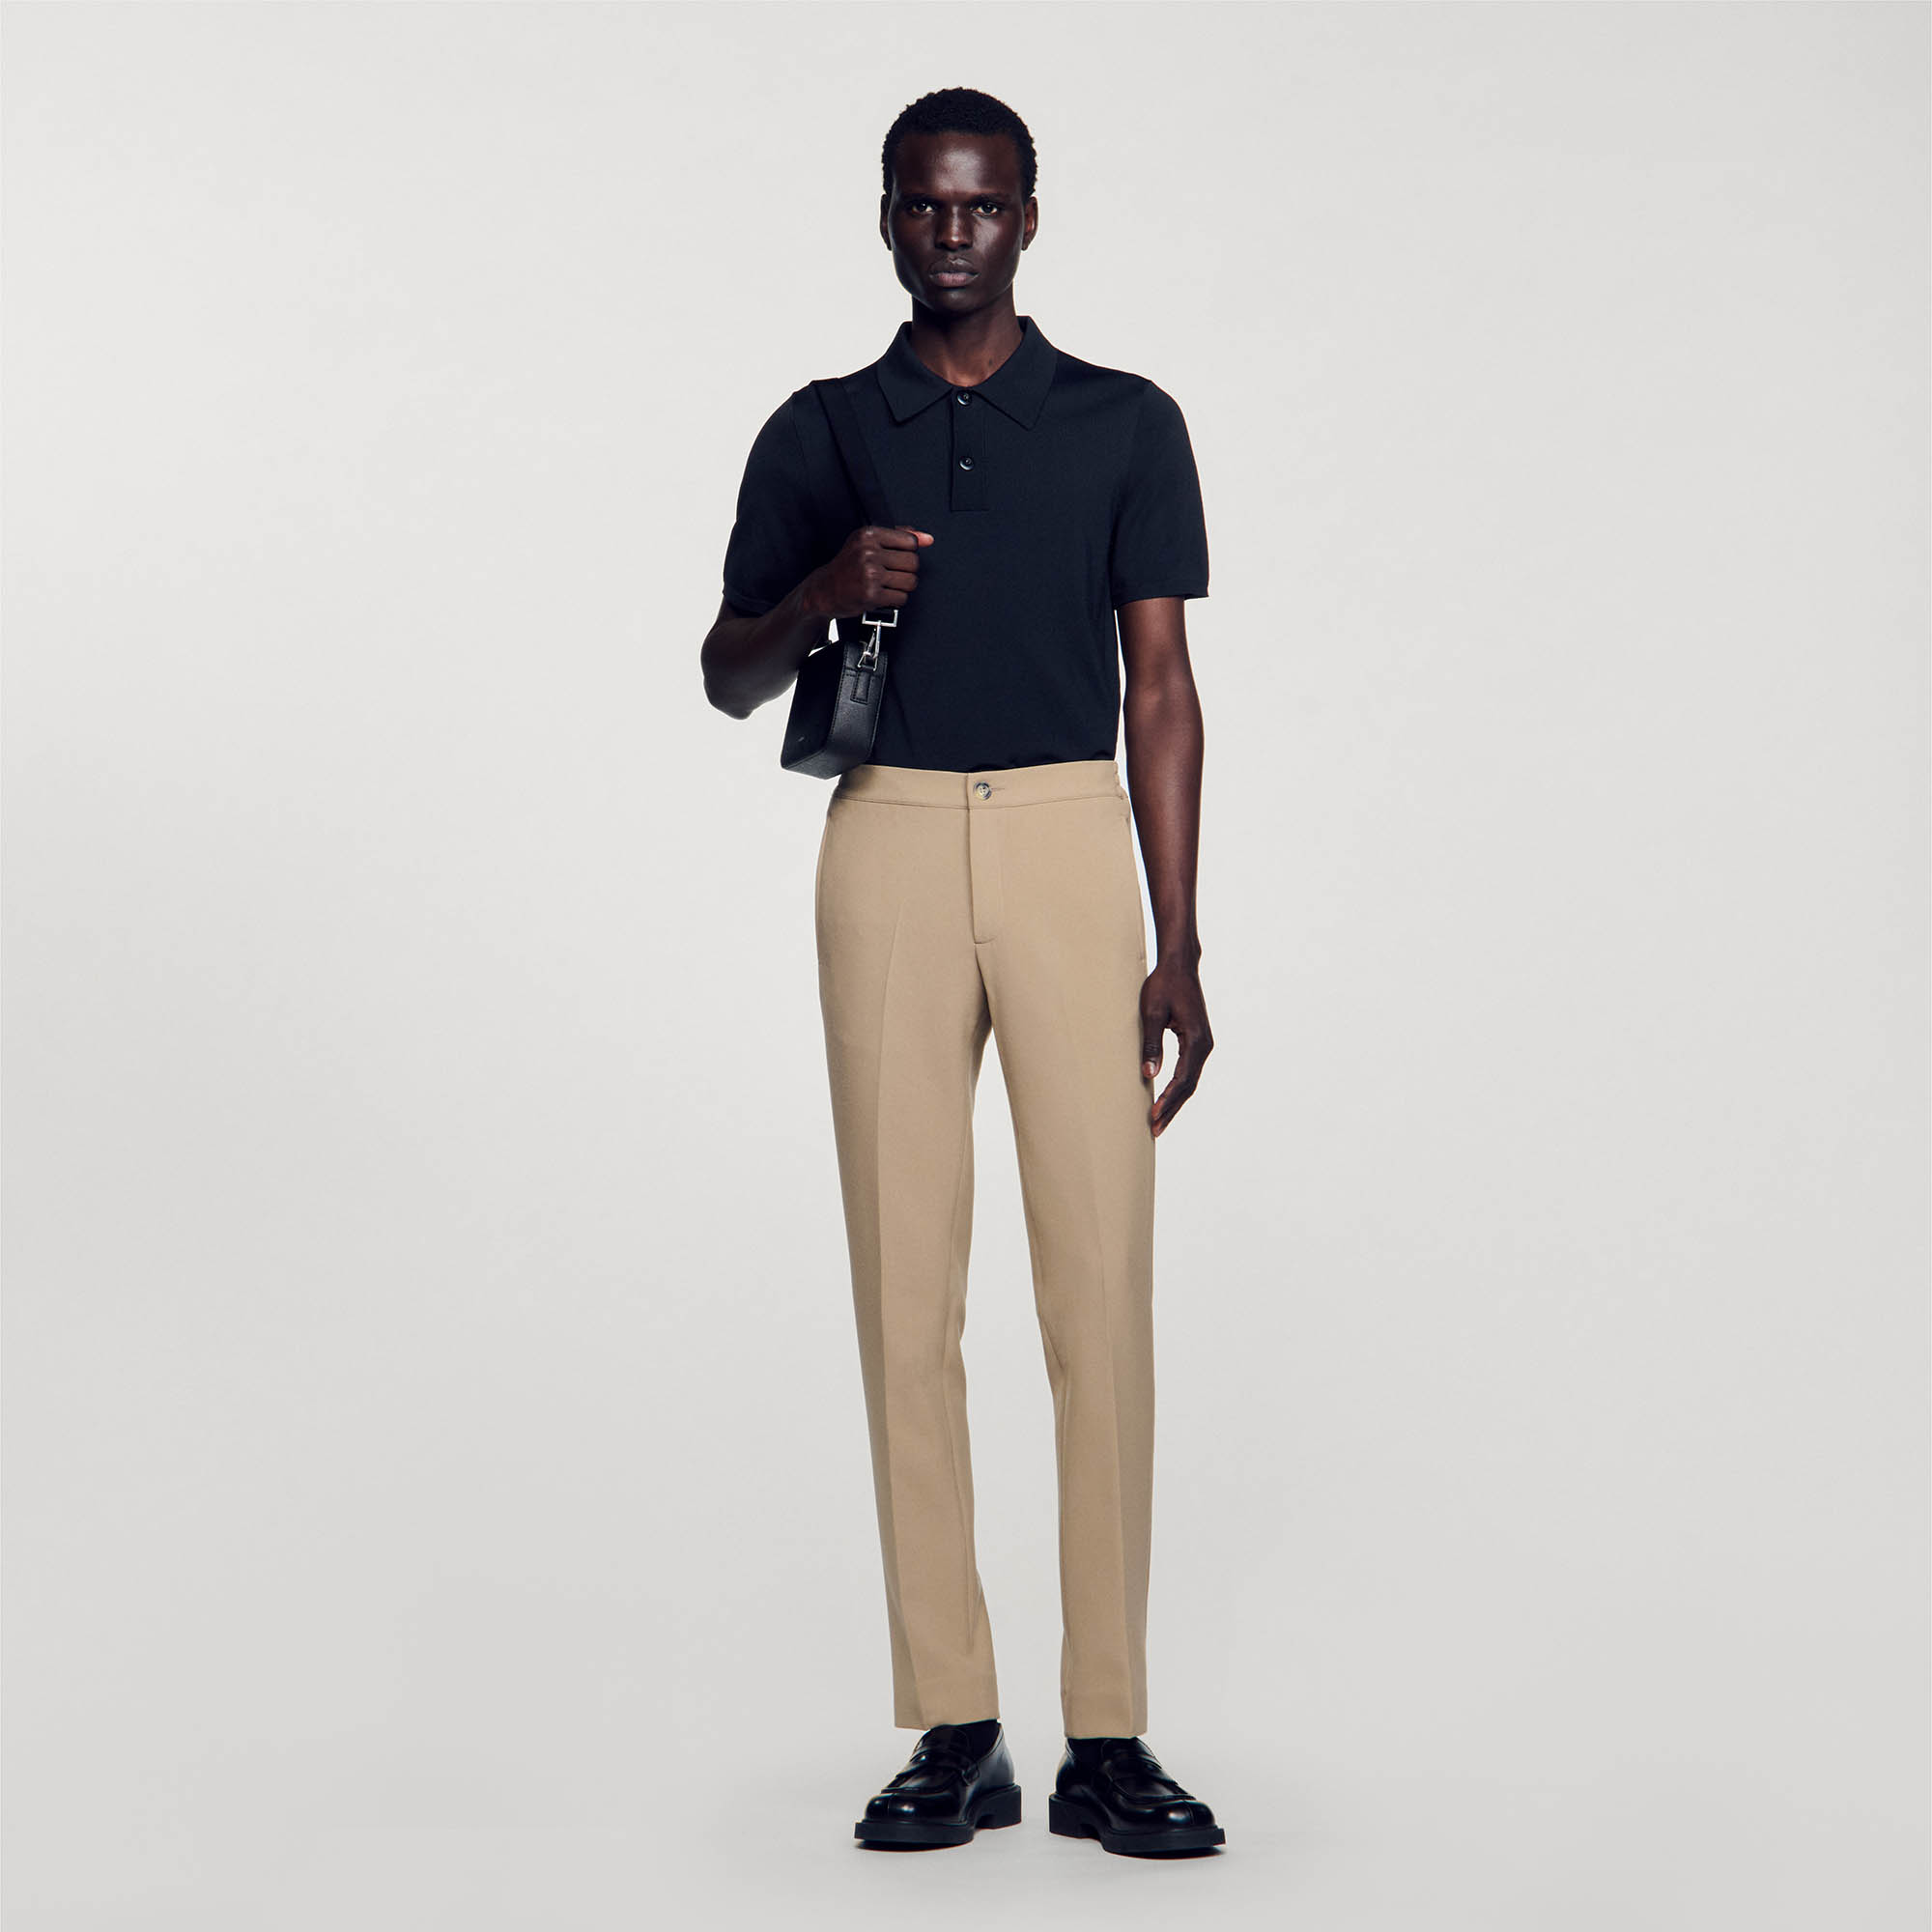 Sandro polyester Sandro men's pants â€¢ Jersey pants â€¢ Button fastening at the front â€¢ Elasticated waist at the back â€¢ Slanted pockets at the front â€¢ Two piped pockets at the back â€¢ The model is wearing a size 38